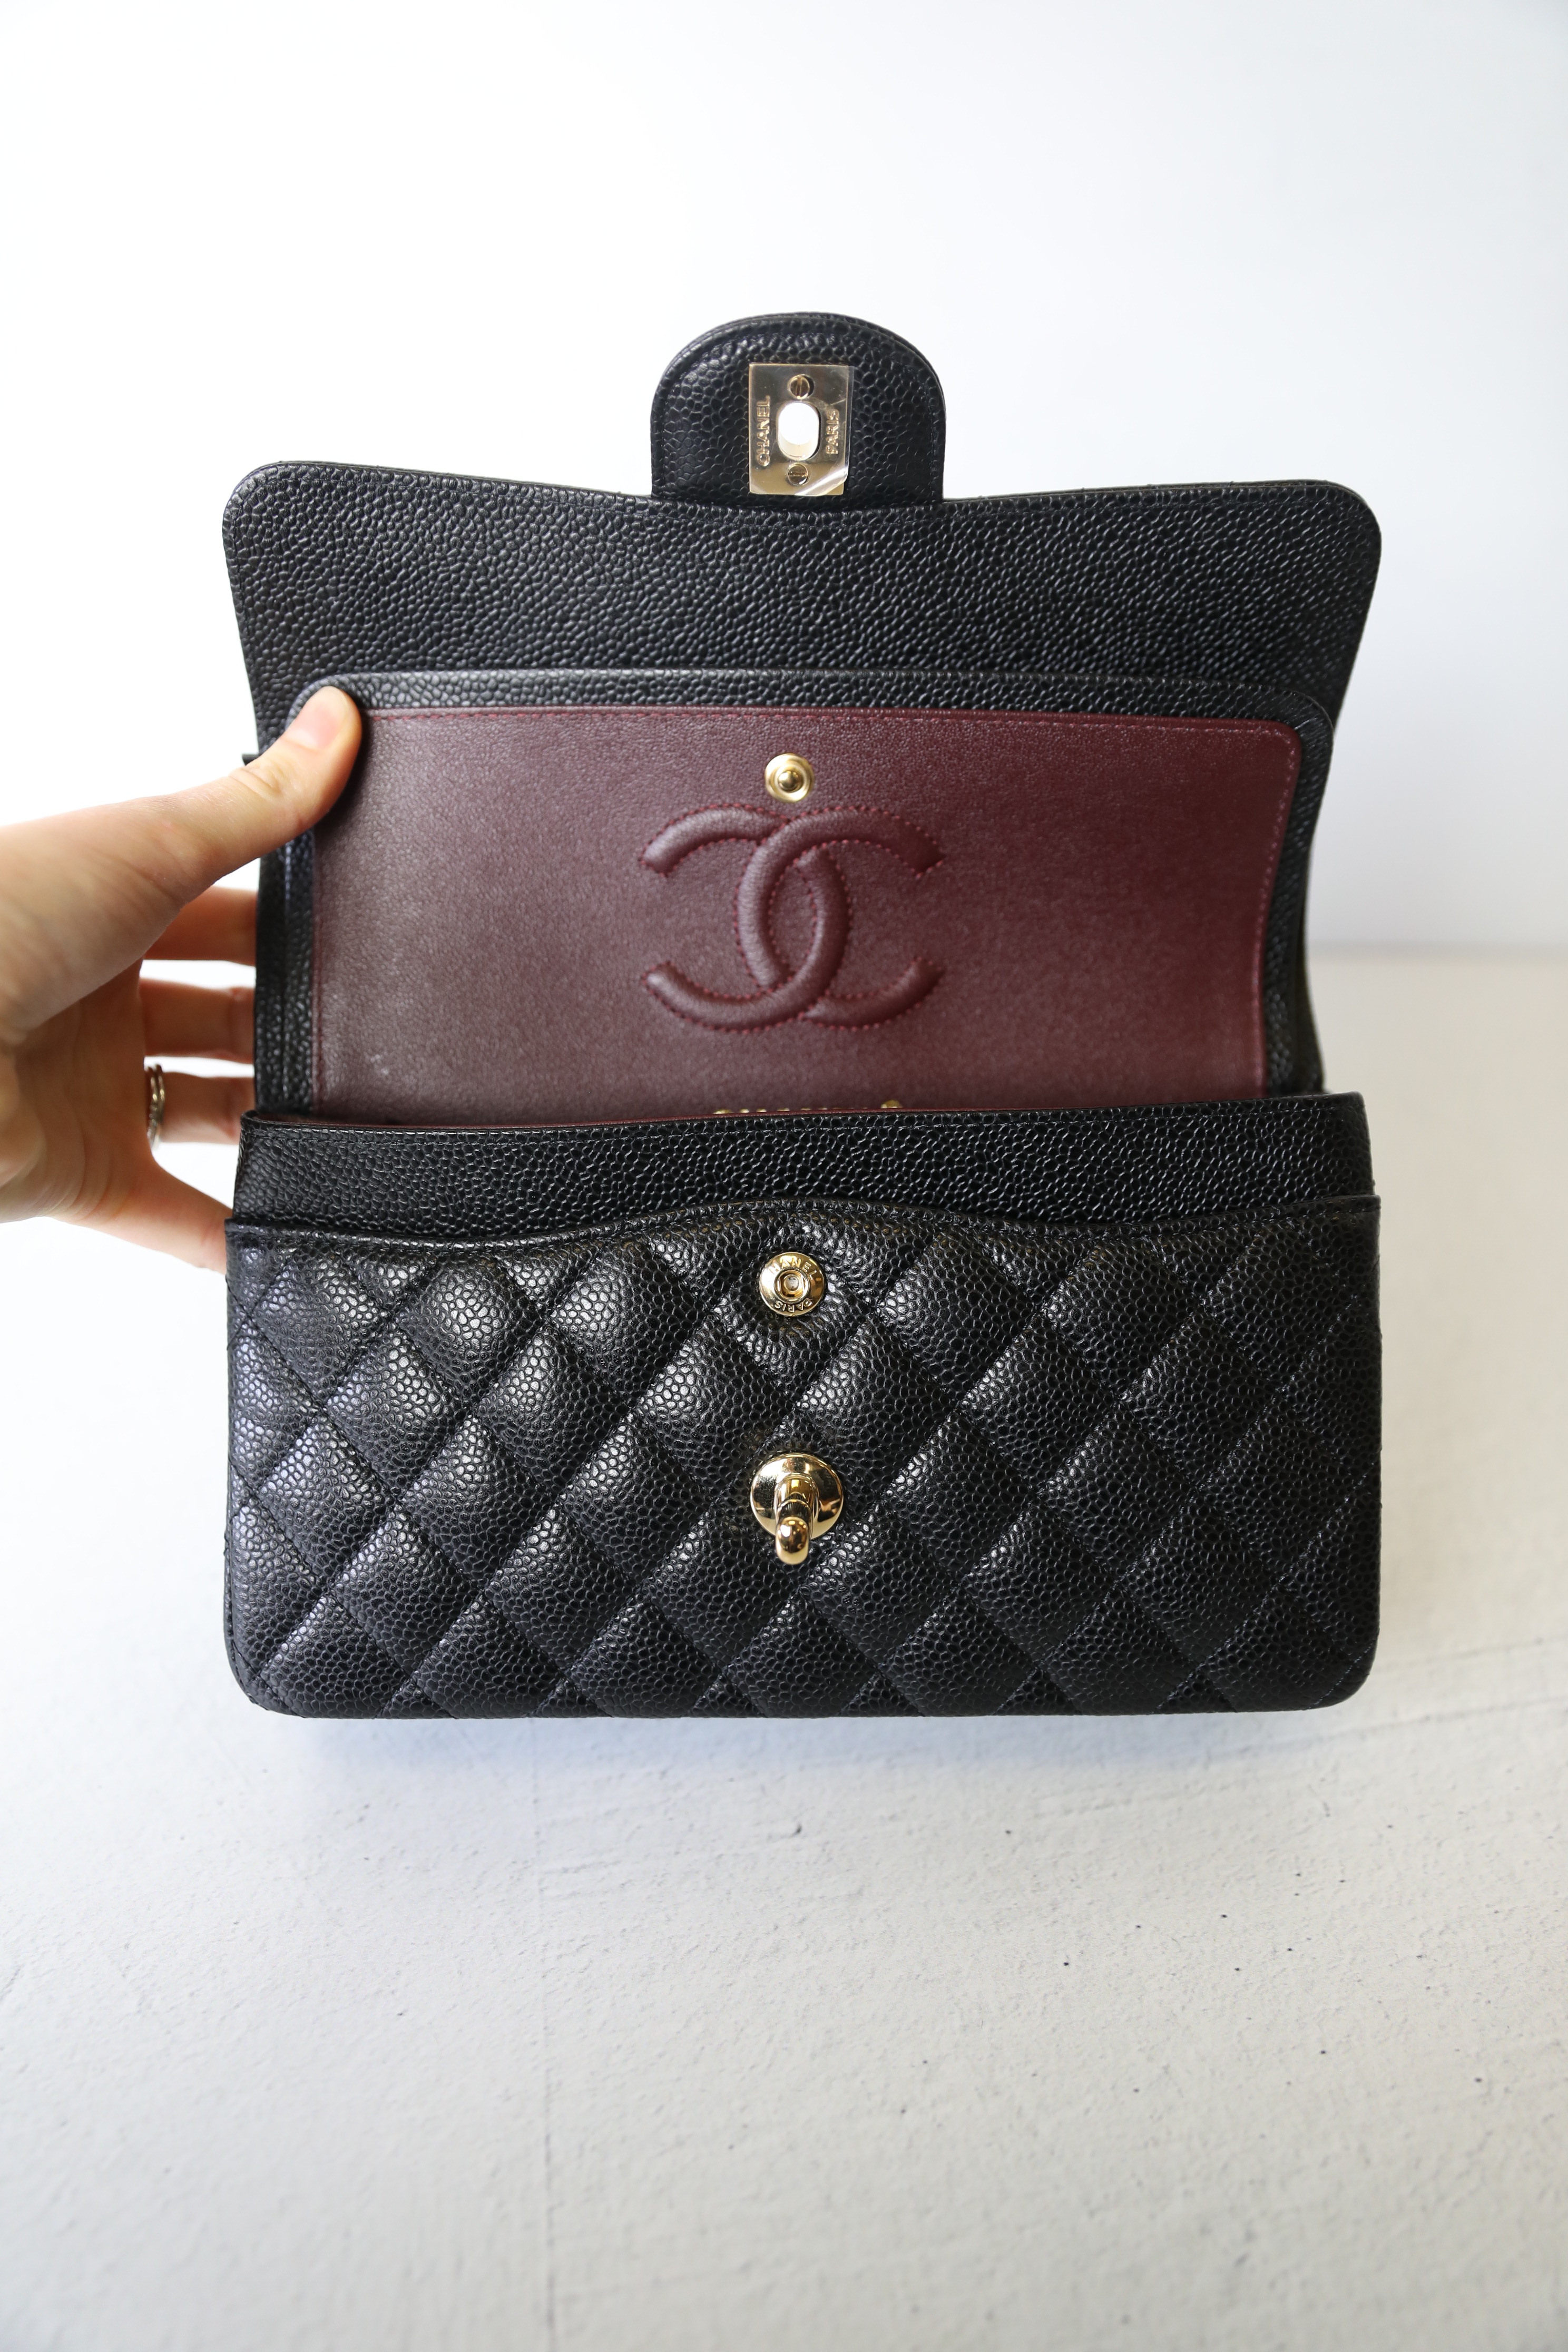 Chanel Classic Small Double Flap, Black Caviar Leather with Gold